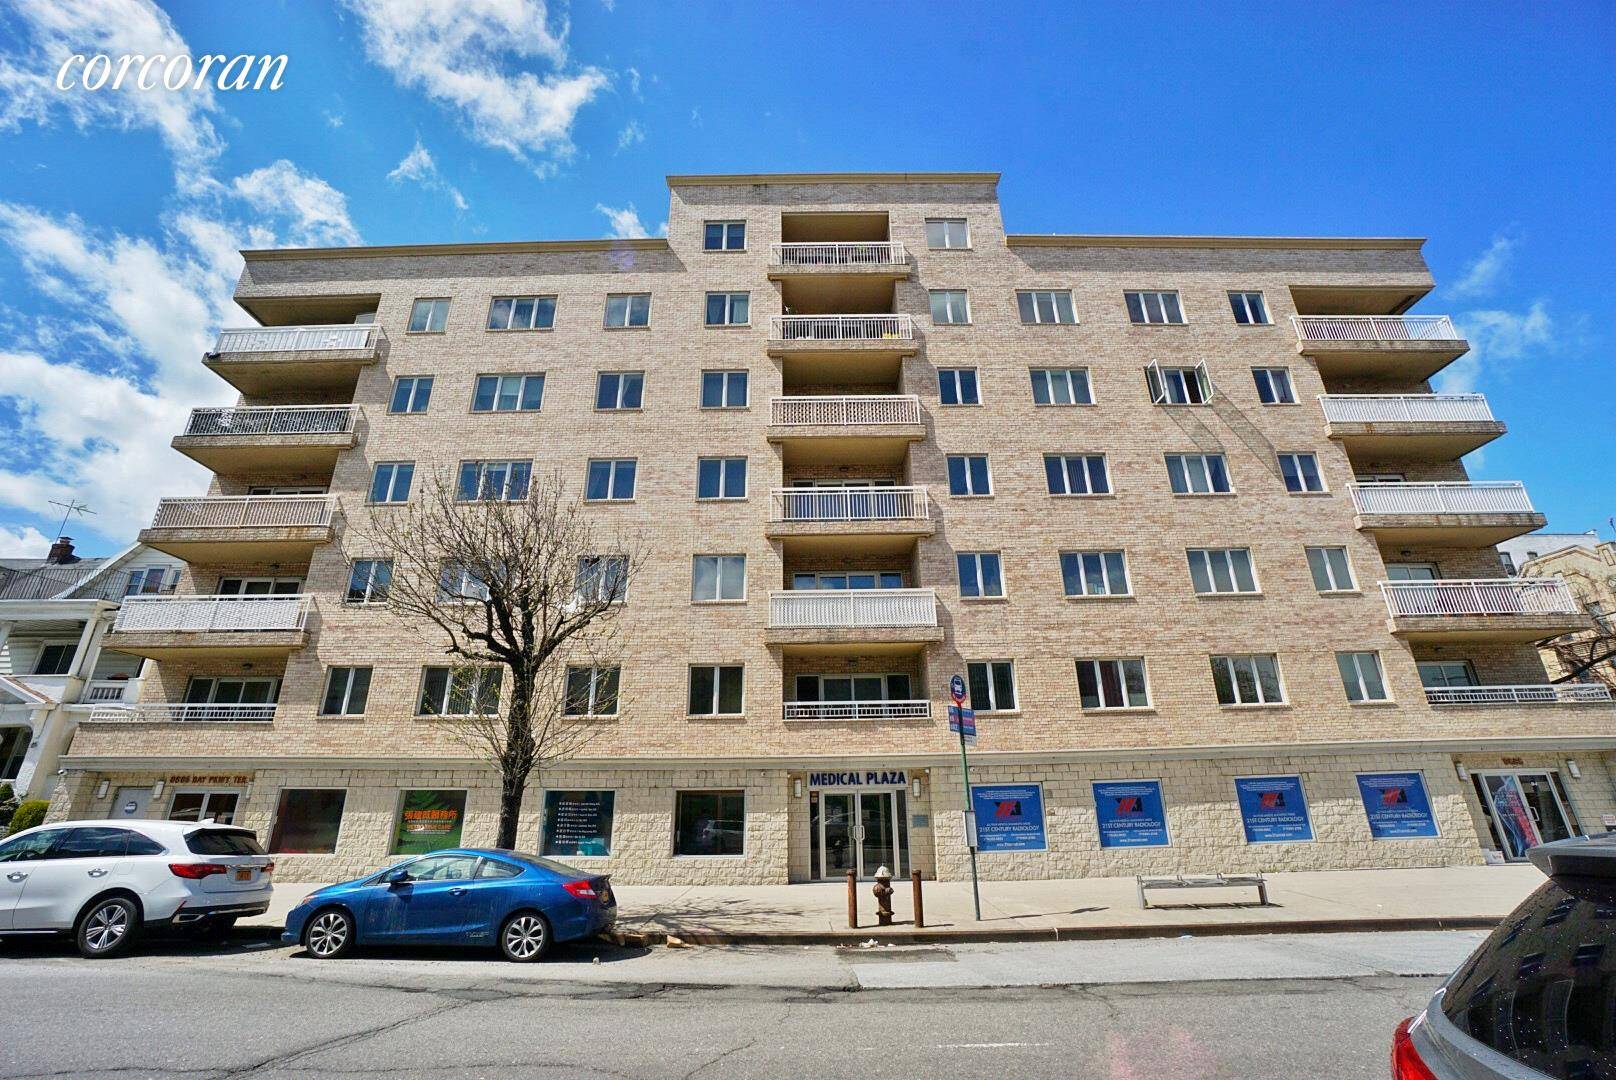 Apt details2 bedroom, 2 bath, 1200 square feet1 block from subway D train Bay Parkway2 blocks from park and Belt Parkway Indoor parking garage next to elevator.